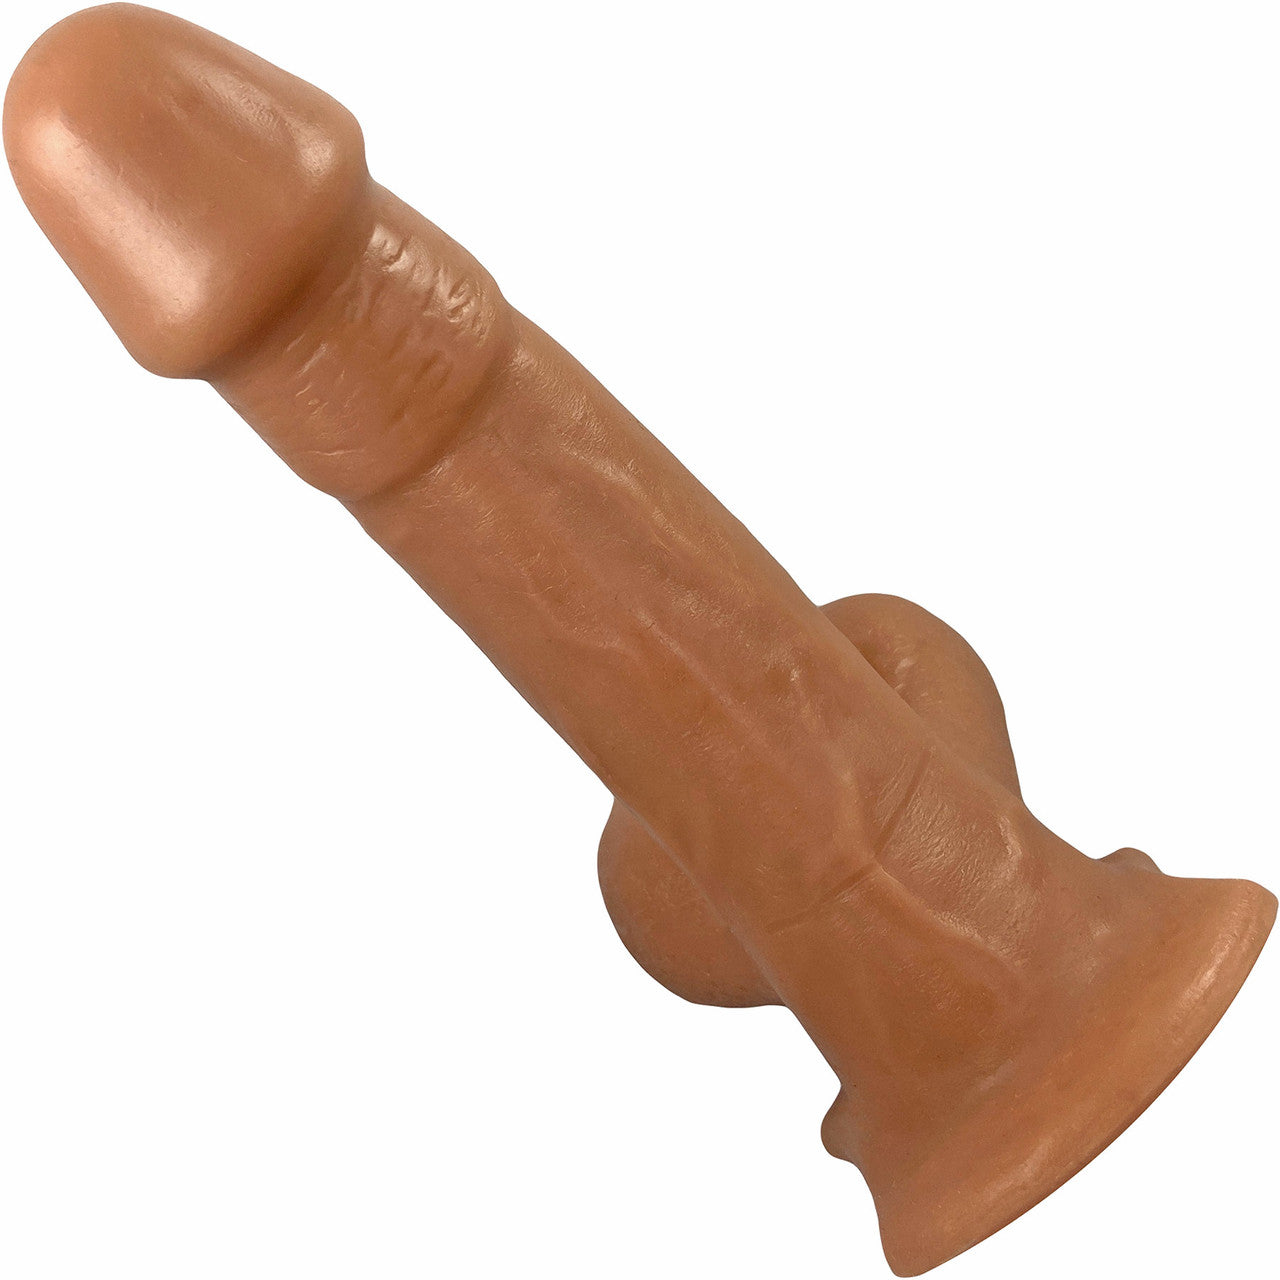 The front of the caramel Goodfella Vixskin Pack n Play Dildo.